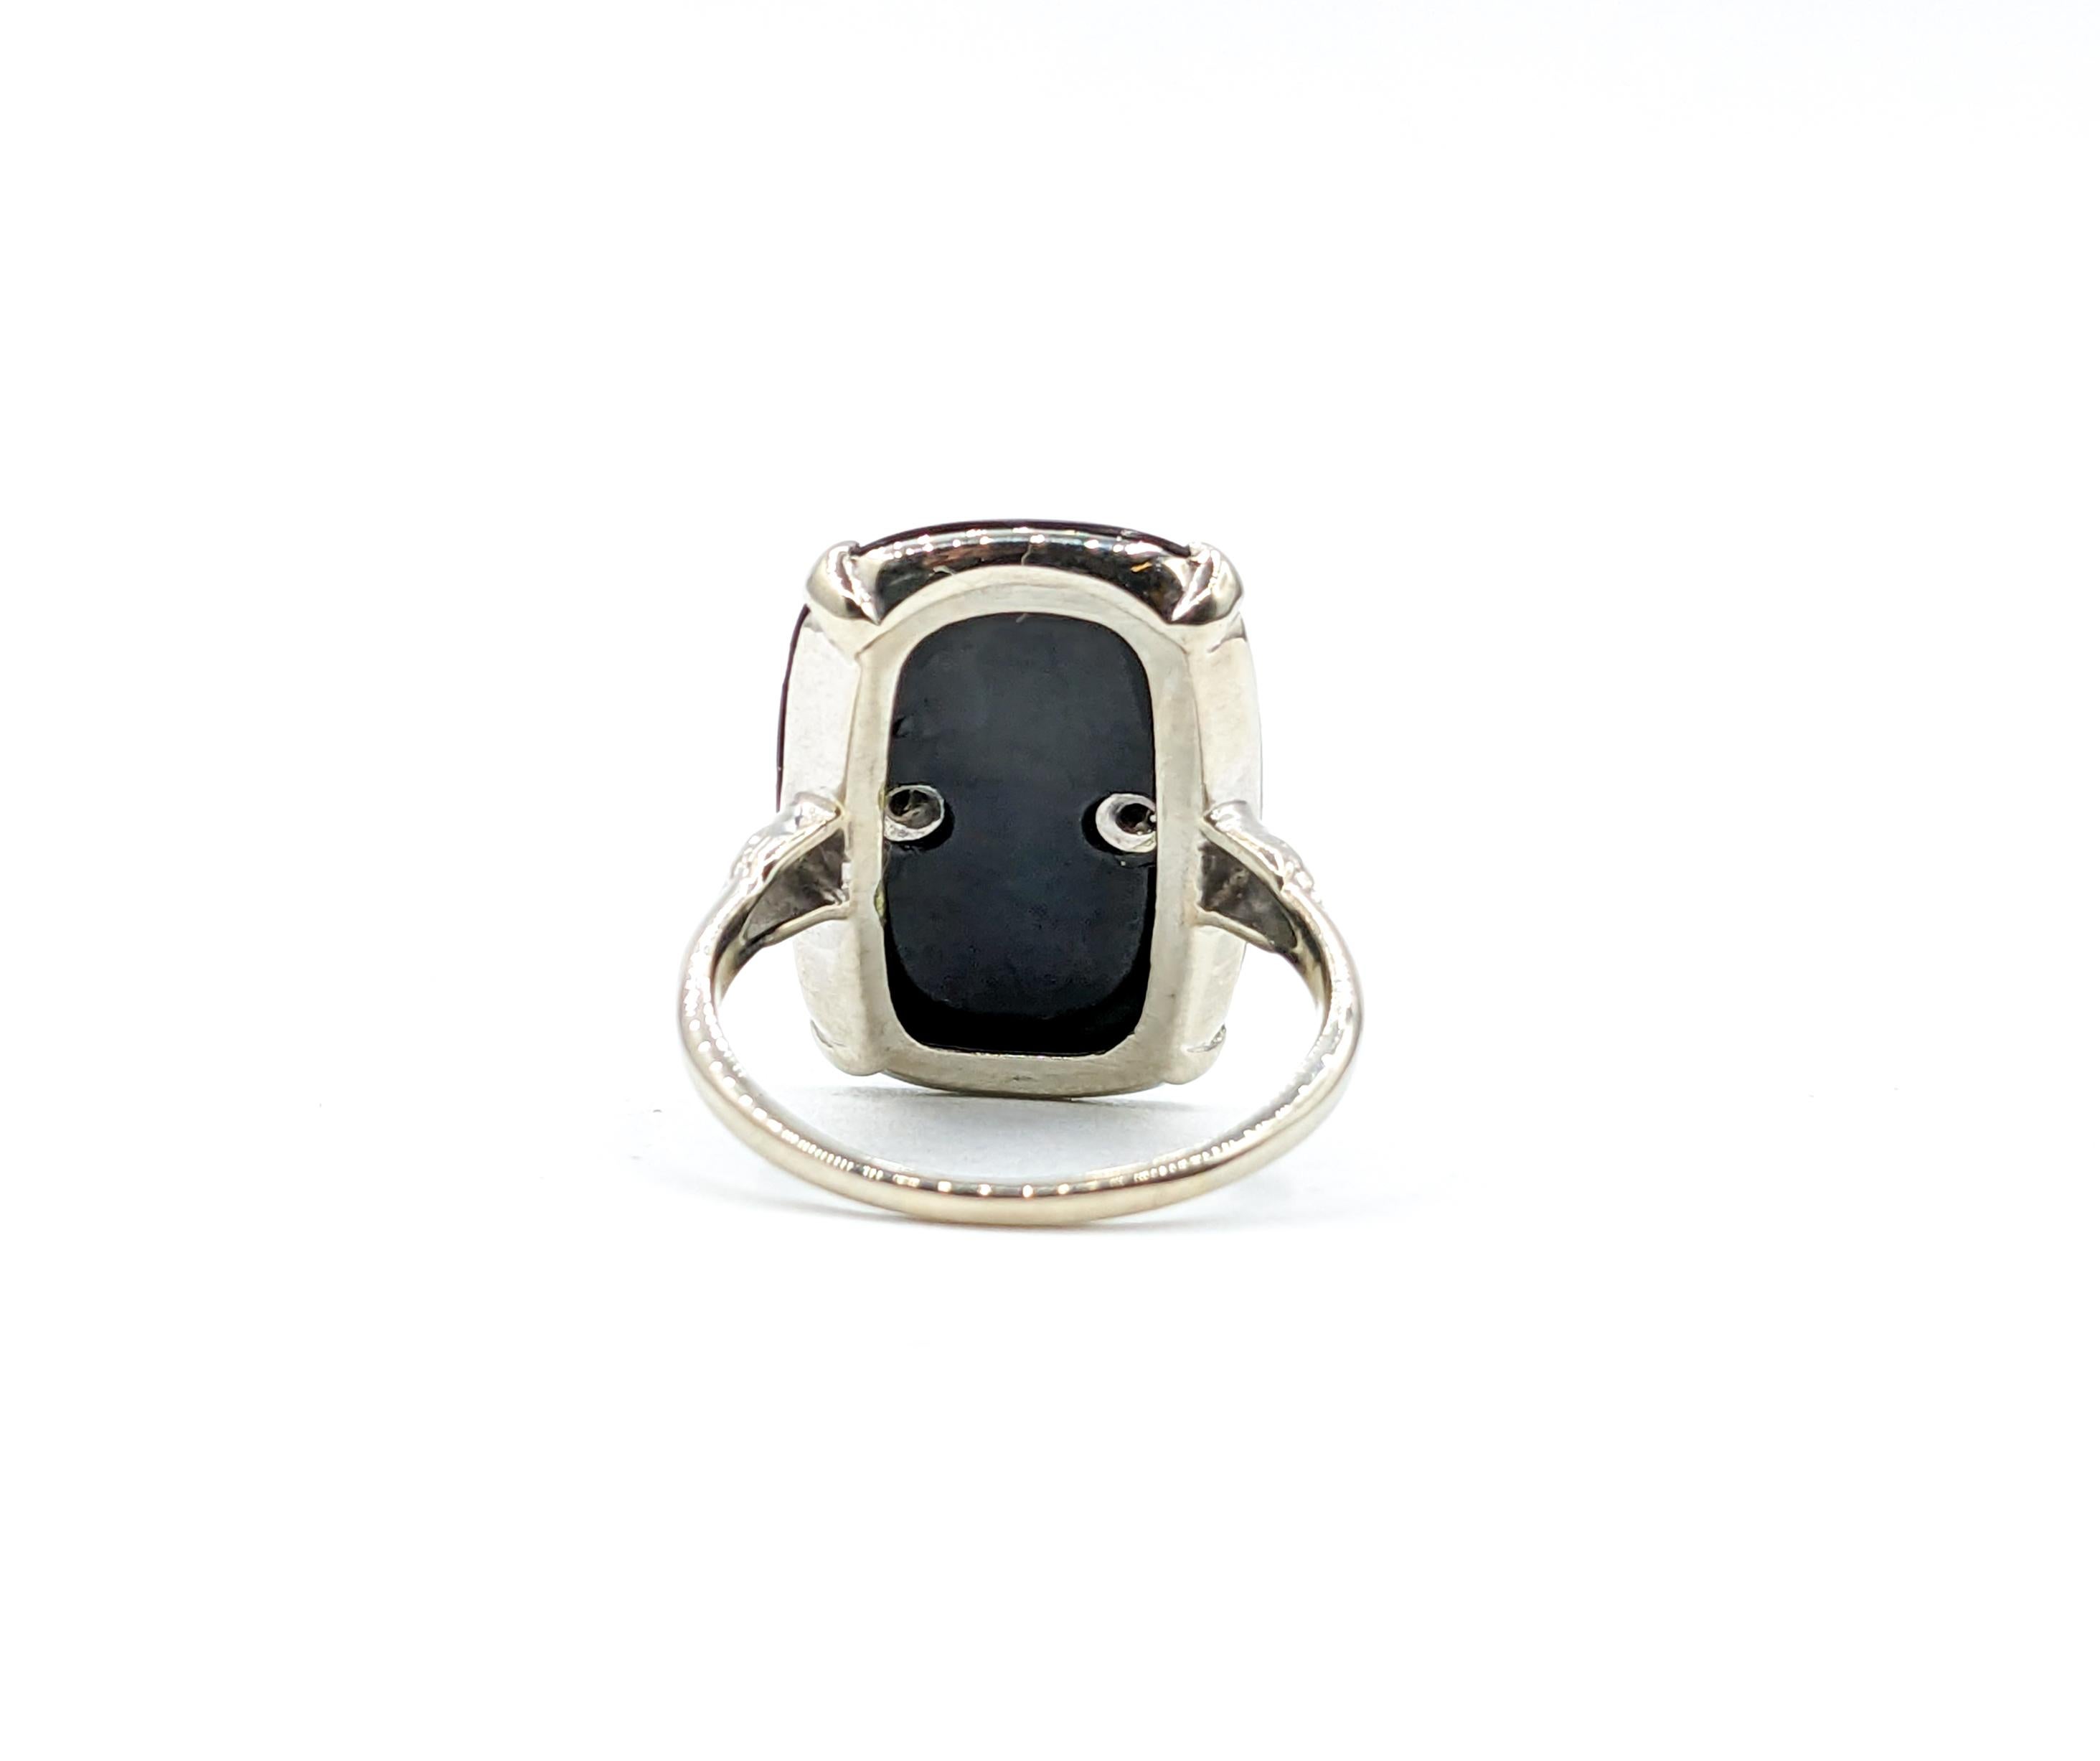 Cabochon Black Onyx & Diamond Cocktail Ring For Sale 2